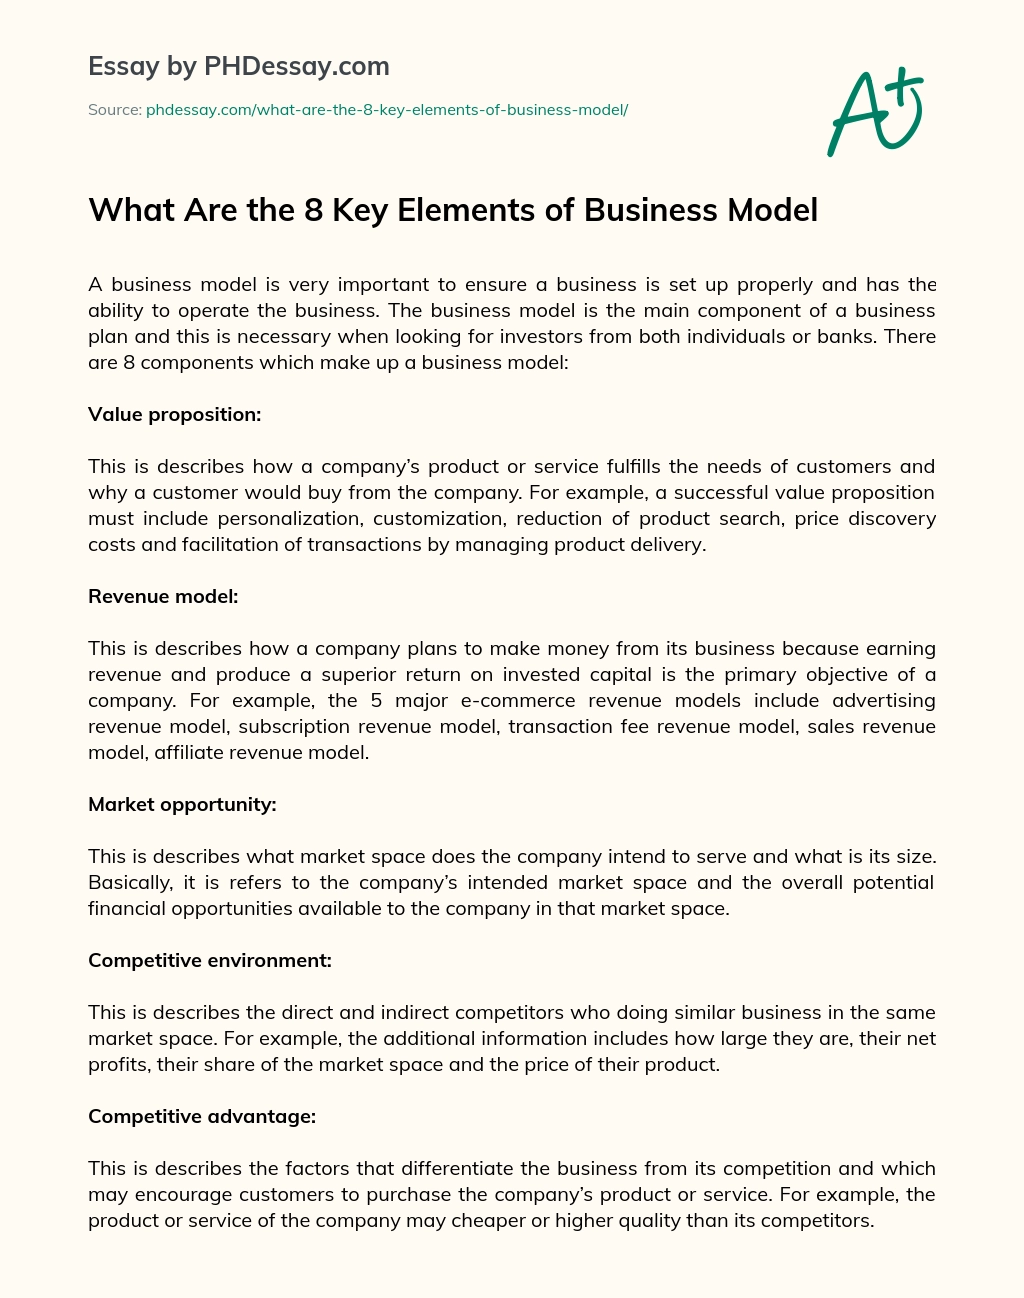 What Are the 8 Key Elements of Business Model essay